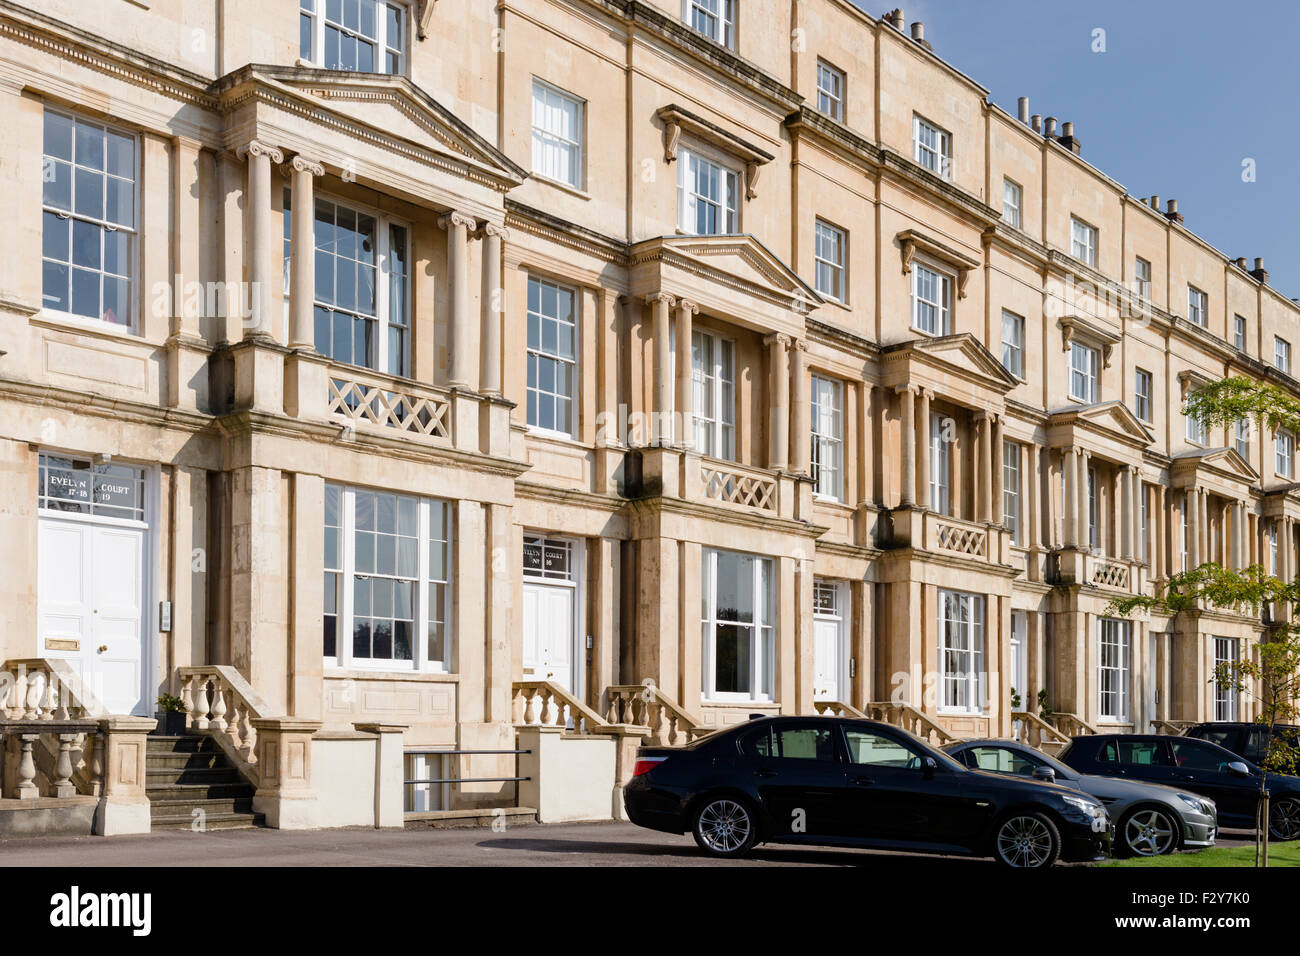 Evelyn Court, Malvern Road, Cheltenham, a beautiful Georgian terrace decorated with classical columns and pediments. Stock Photo